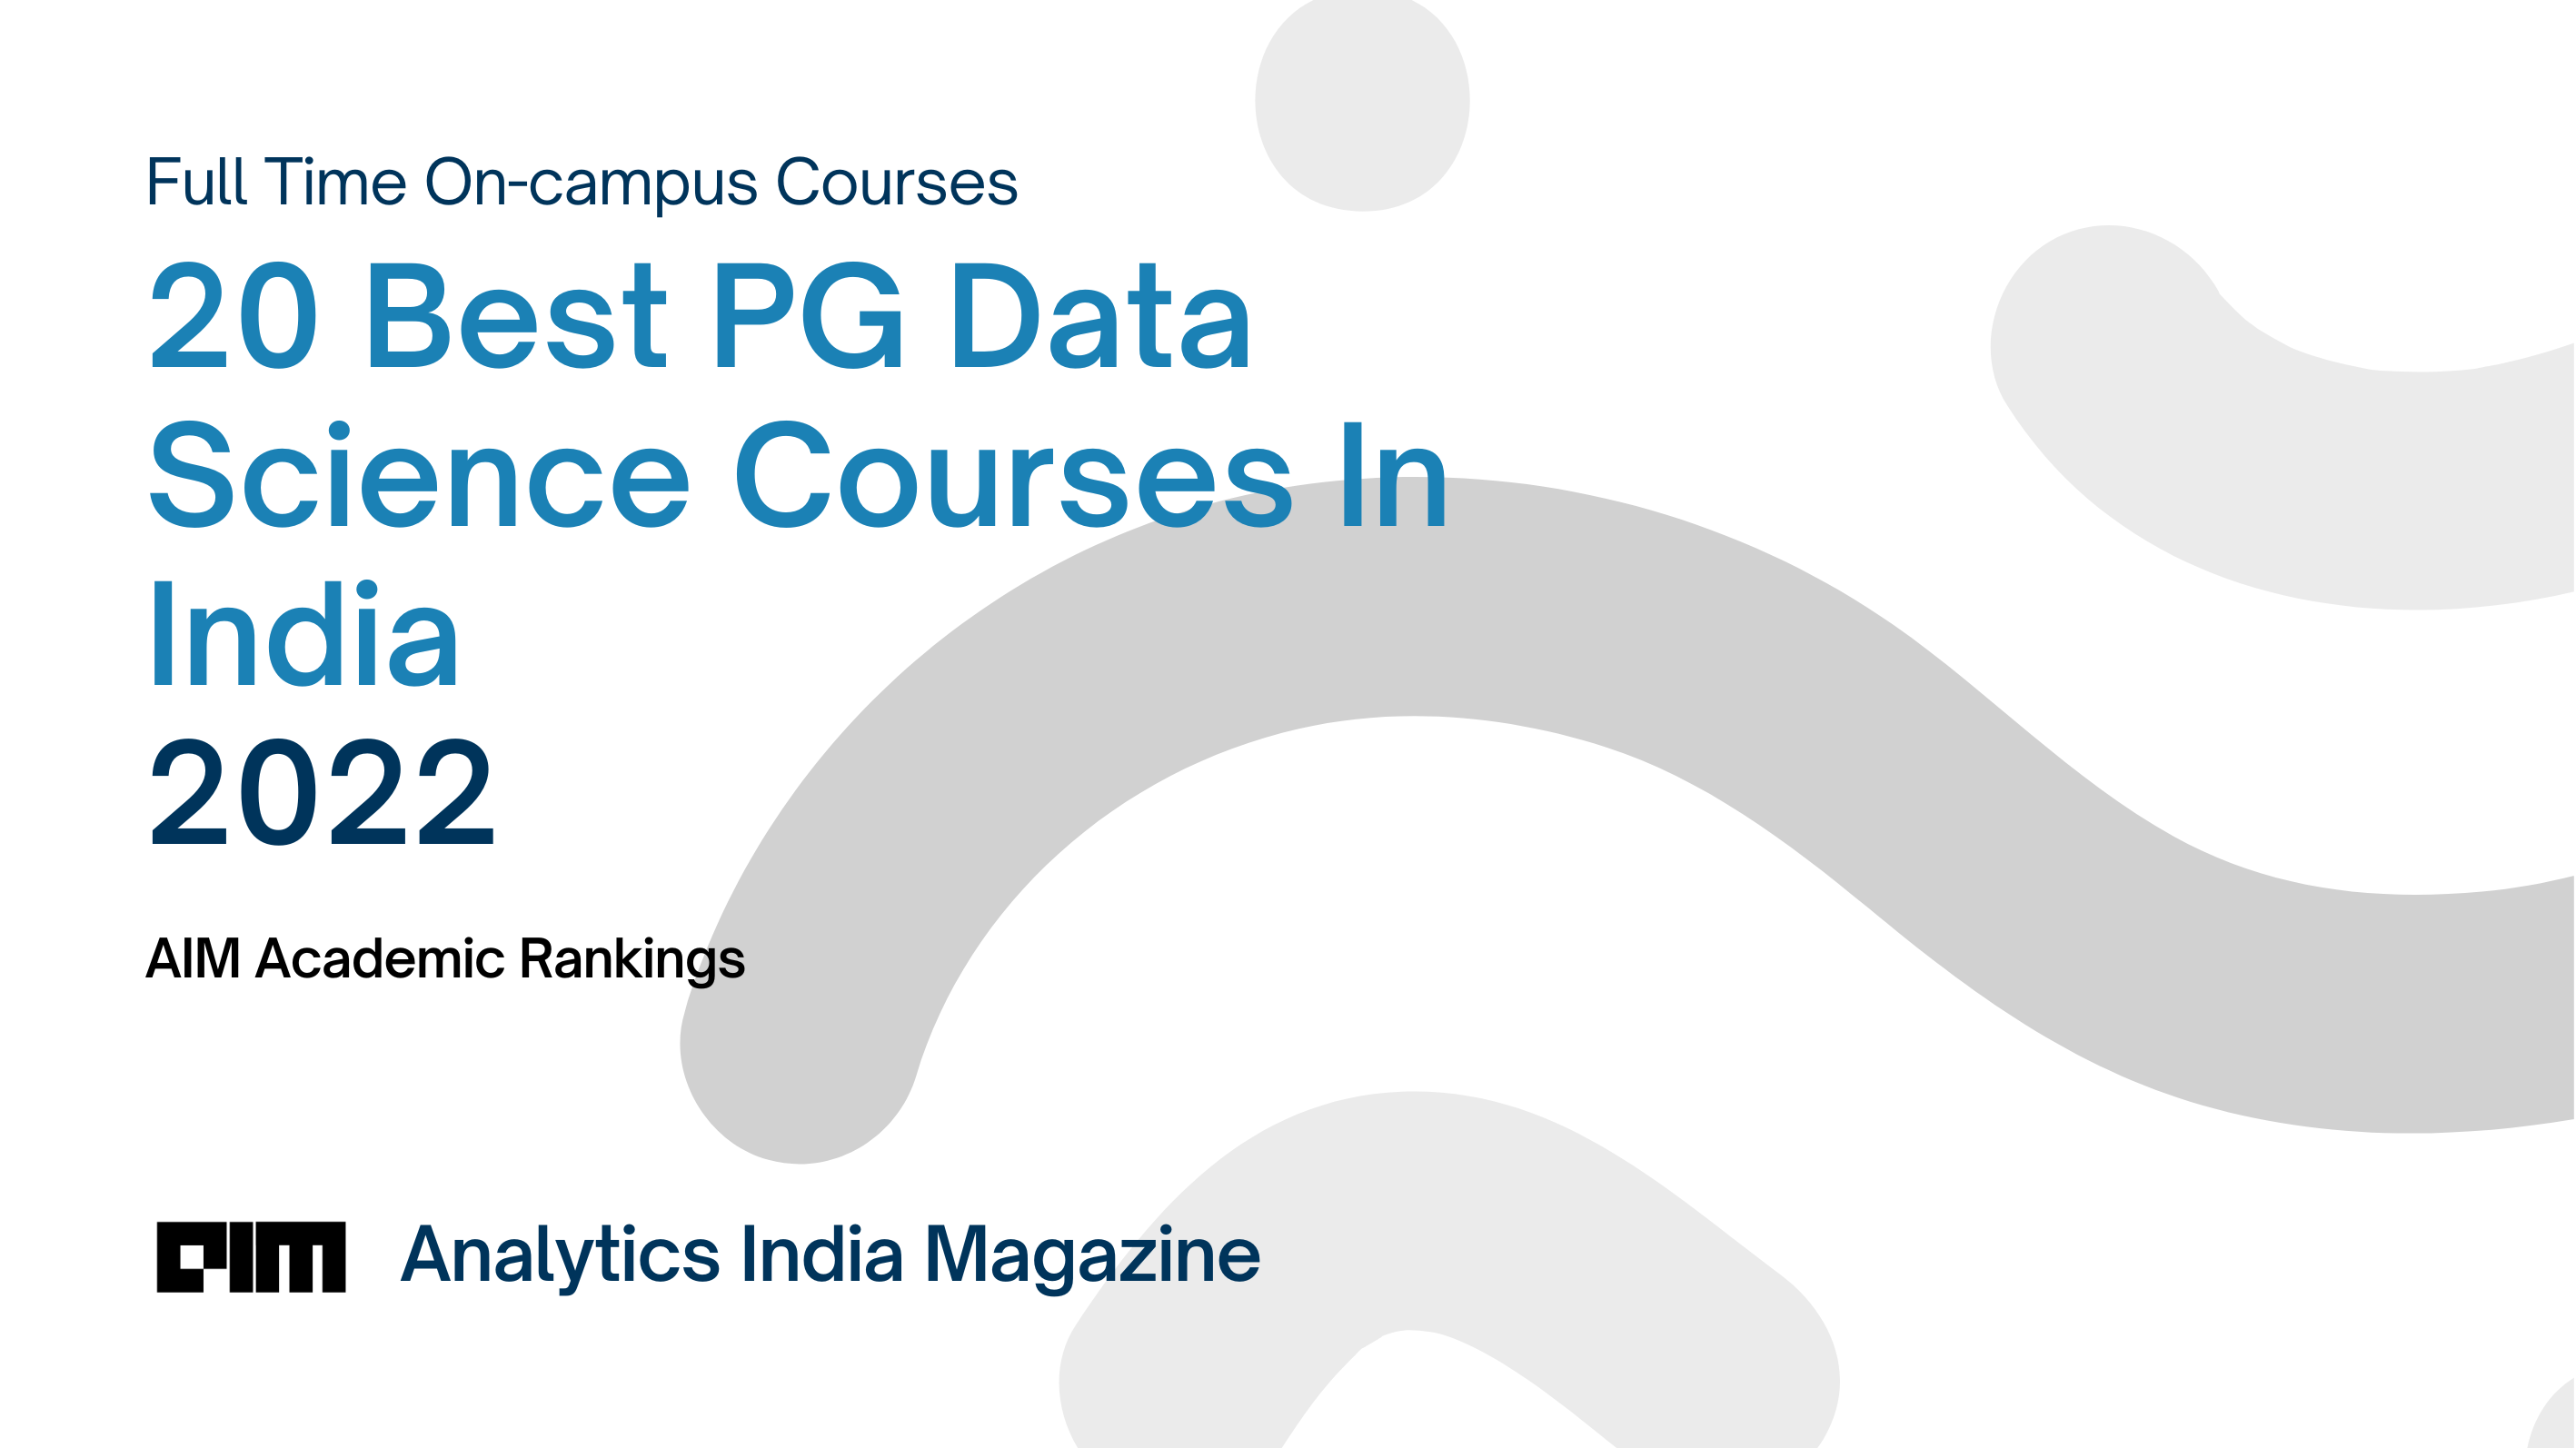 20 Best PG Data Science Courses In India 2022